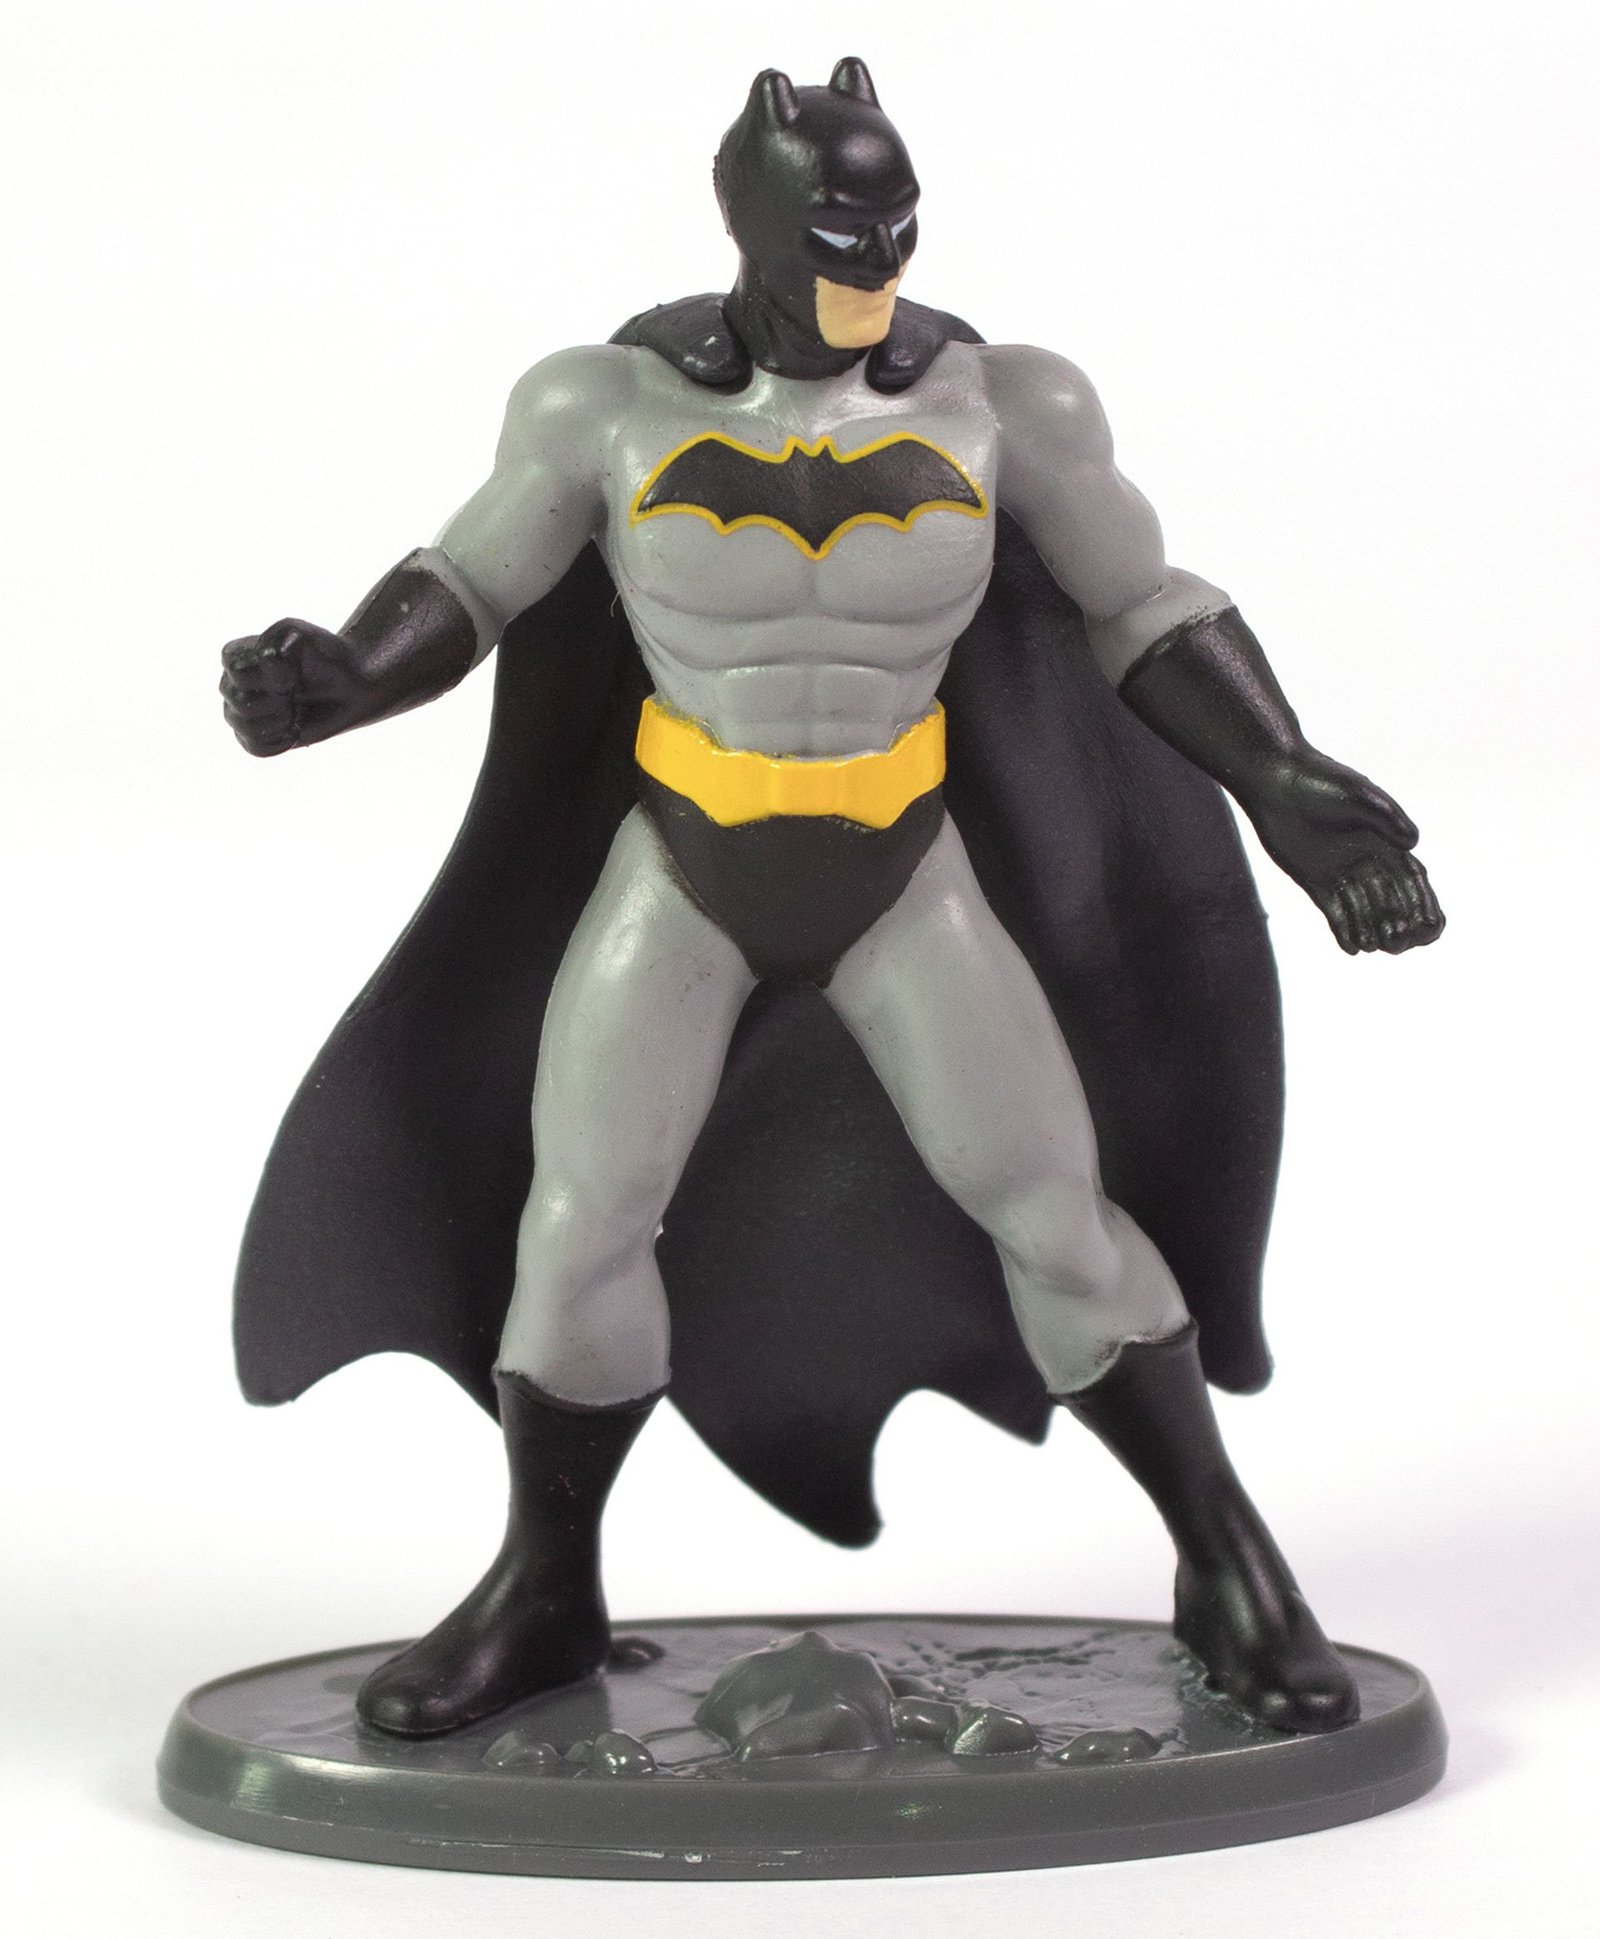 Mattel Batman Action Figure Black Grey - Height  cm Online India, Buy  Figures & Playsets for (3-8 Years) at  - 8756438